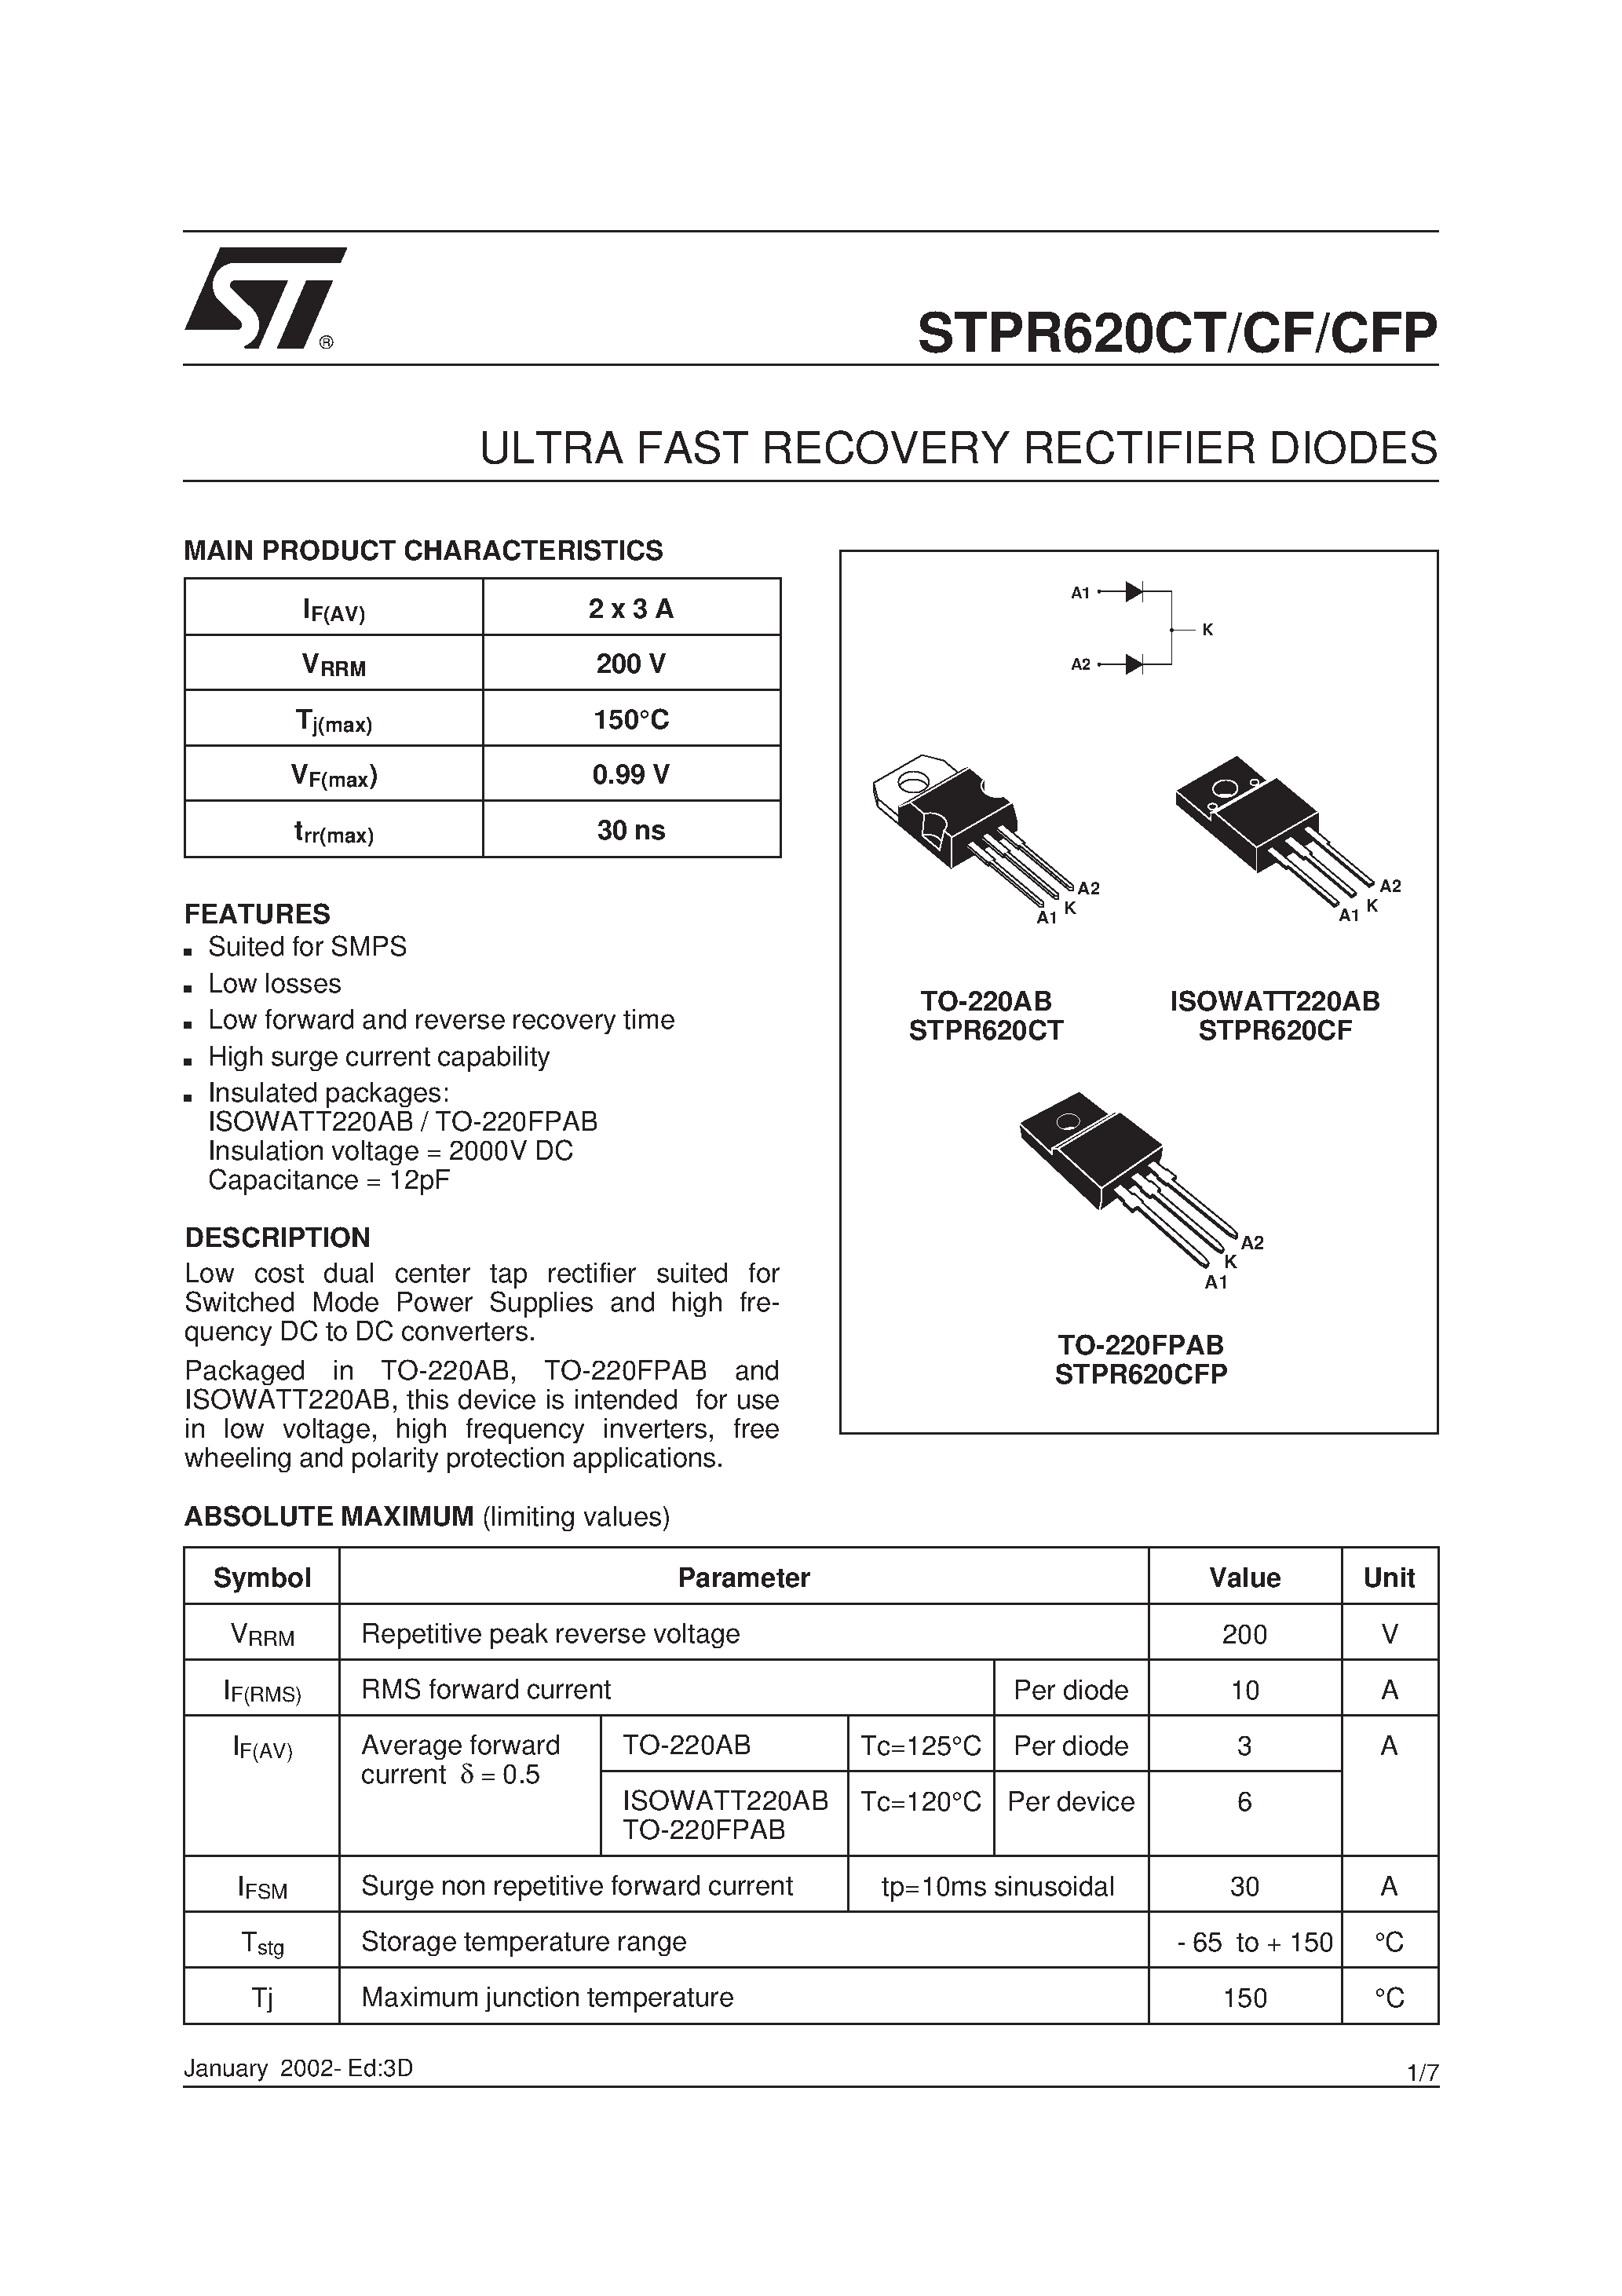 Даташит STPR620C - ULTRA FAST RECOVERY RECTIFIER DIODES страница 1